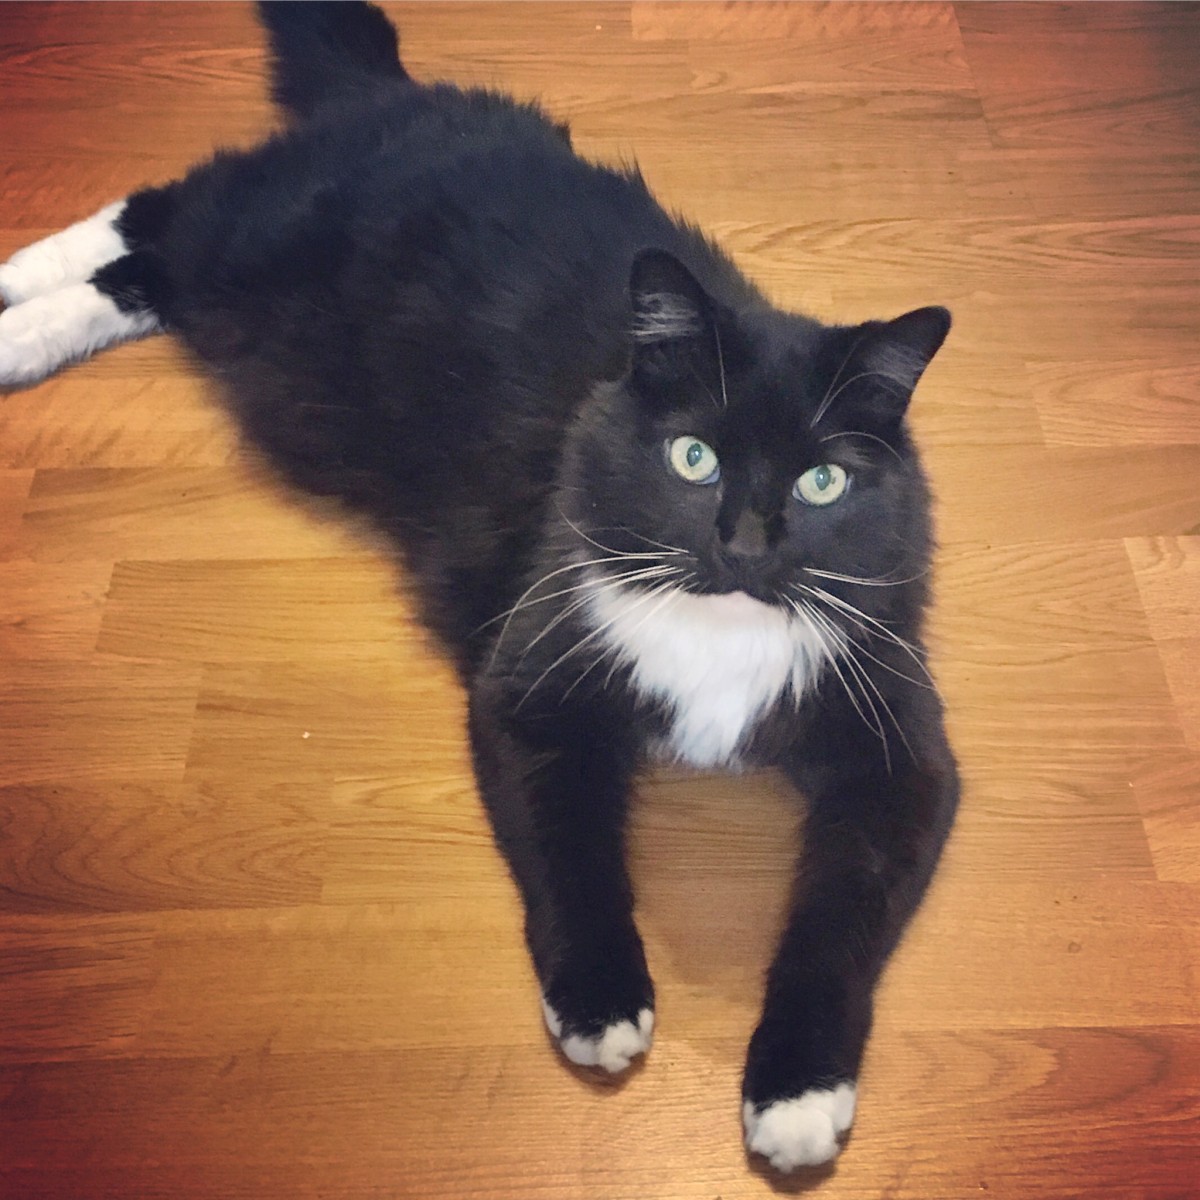 Tuxedo Cat, Shaggy, Finds New Home After Owner’s Passing